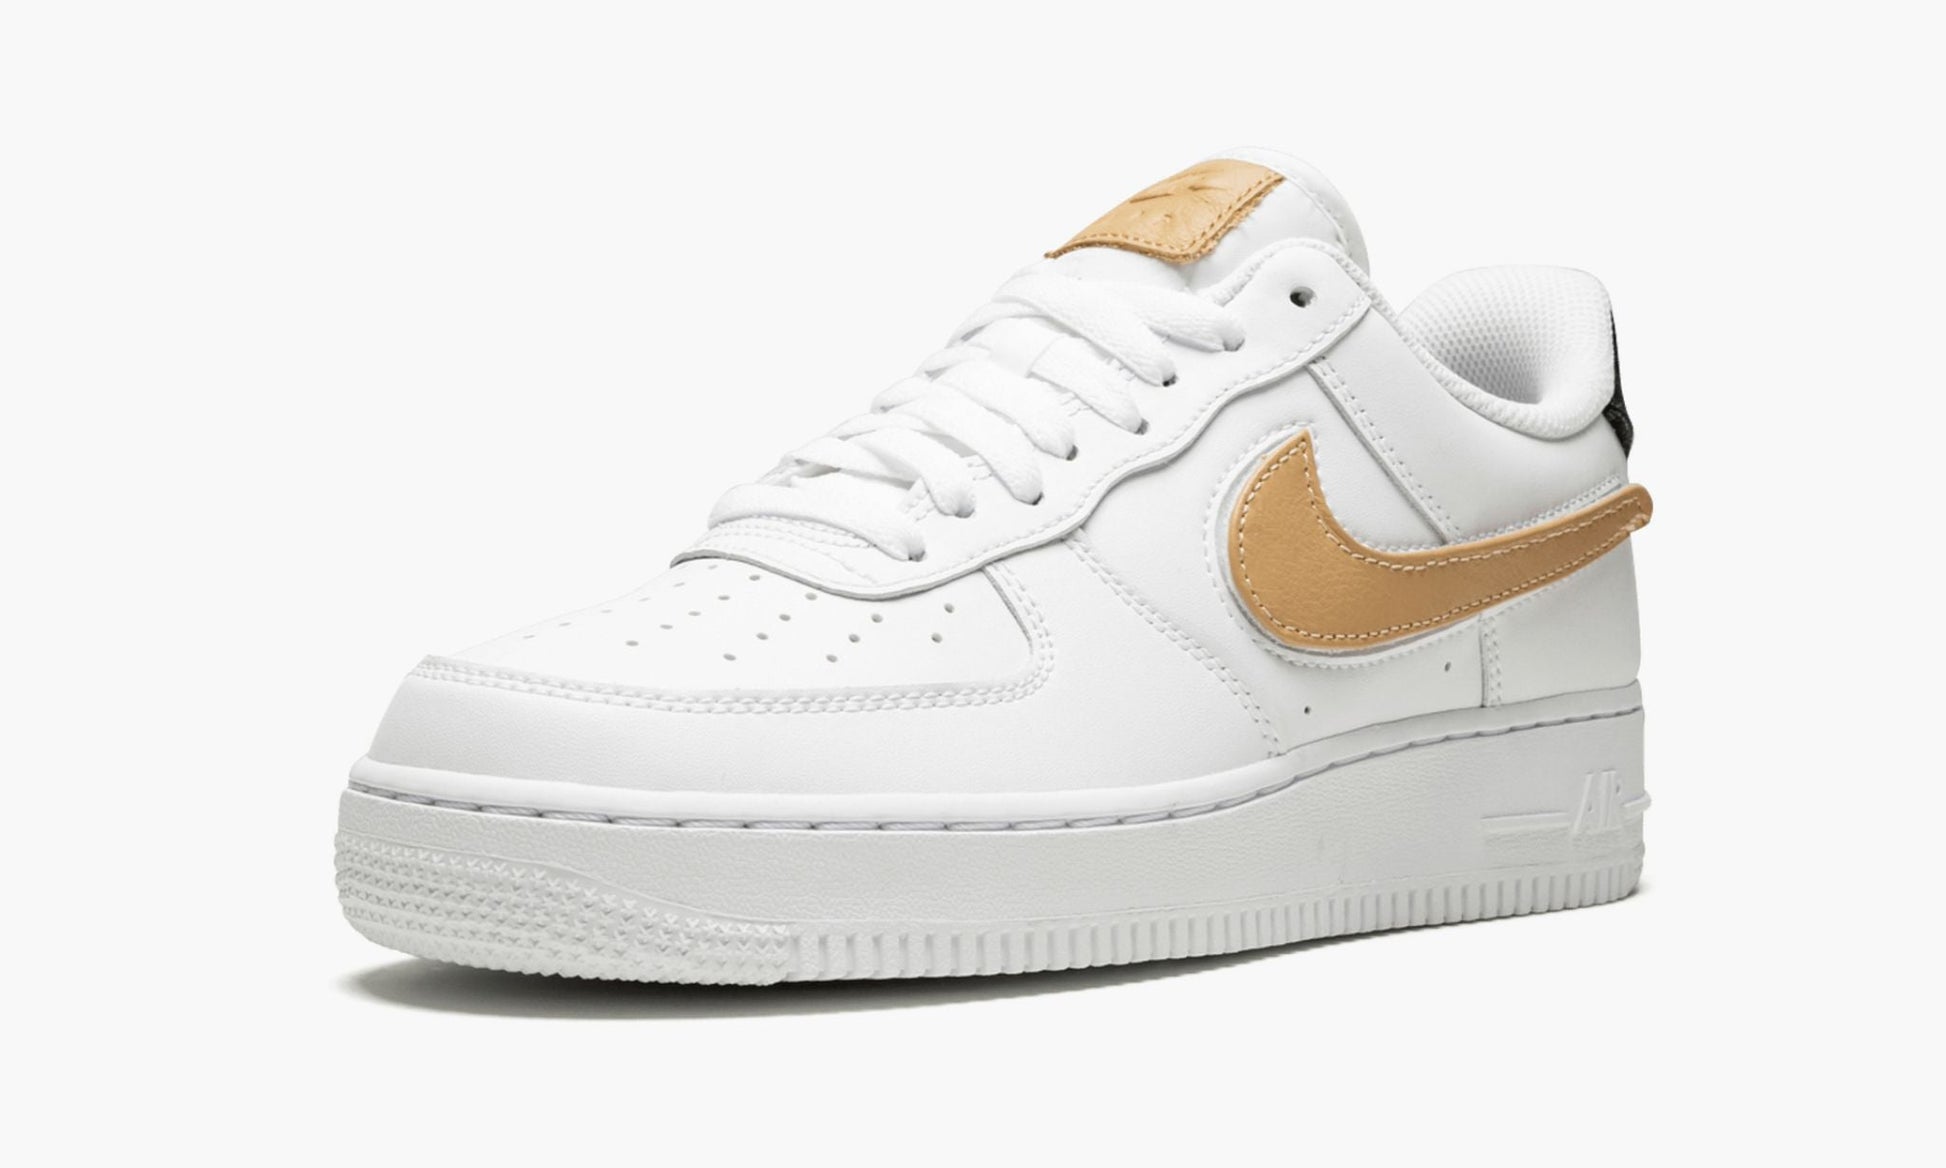 Air Force 1 ' 07 LV8 3 "Removable Swoosh"